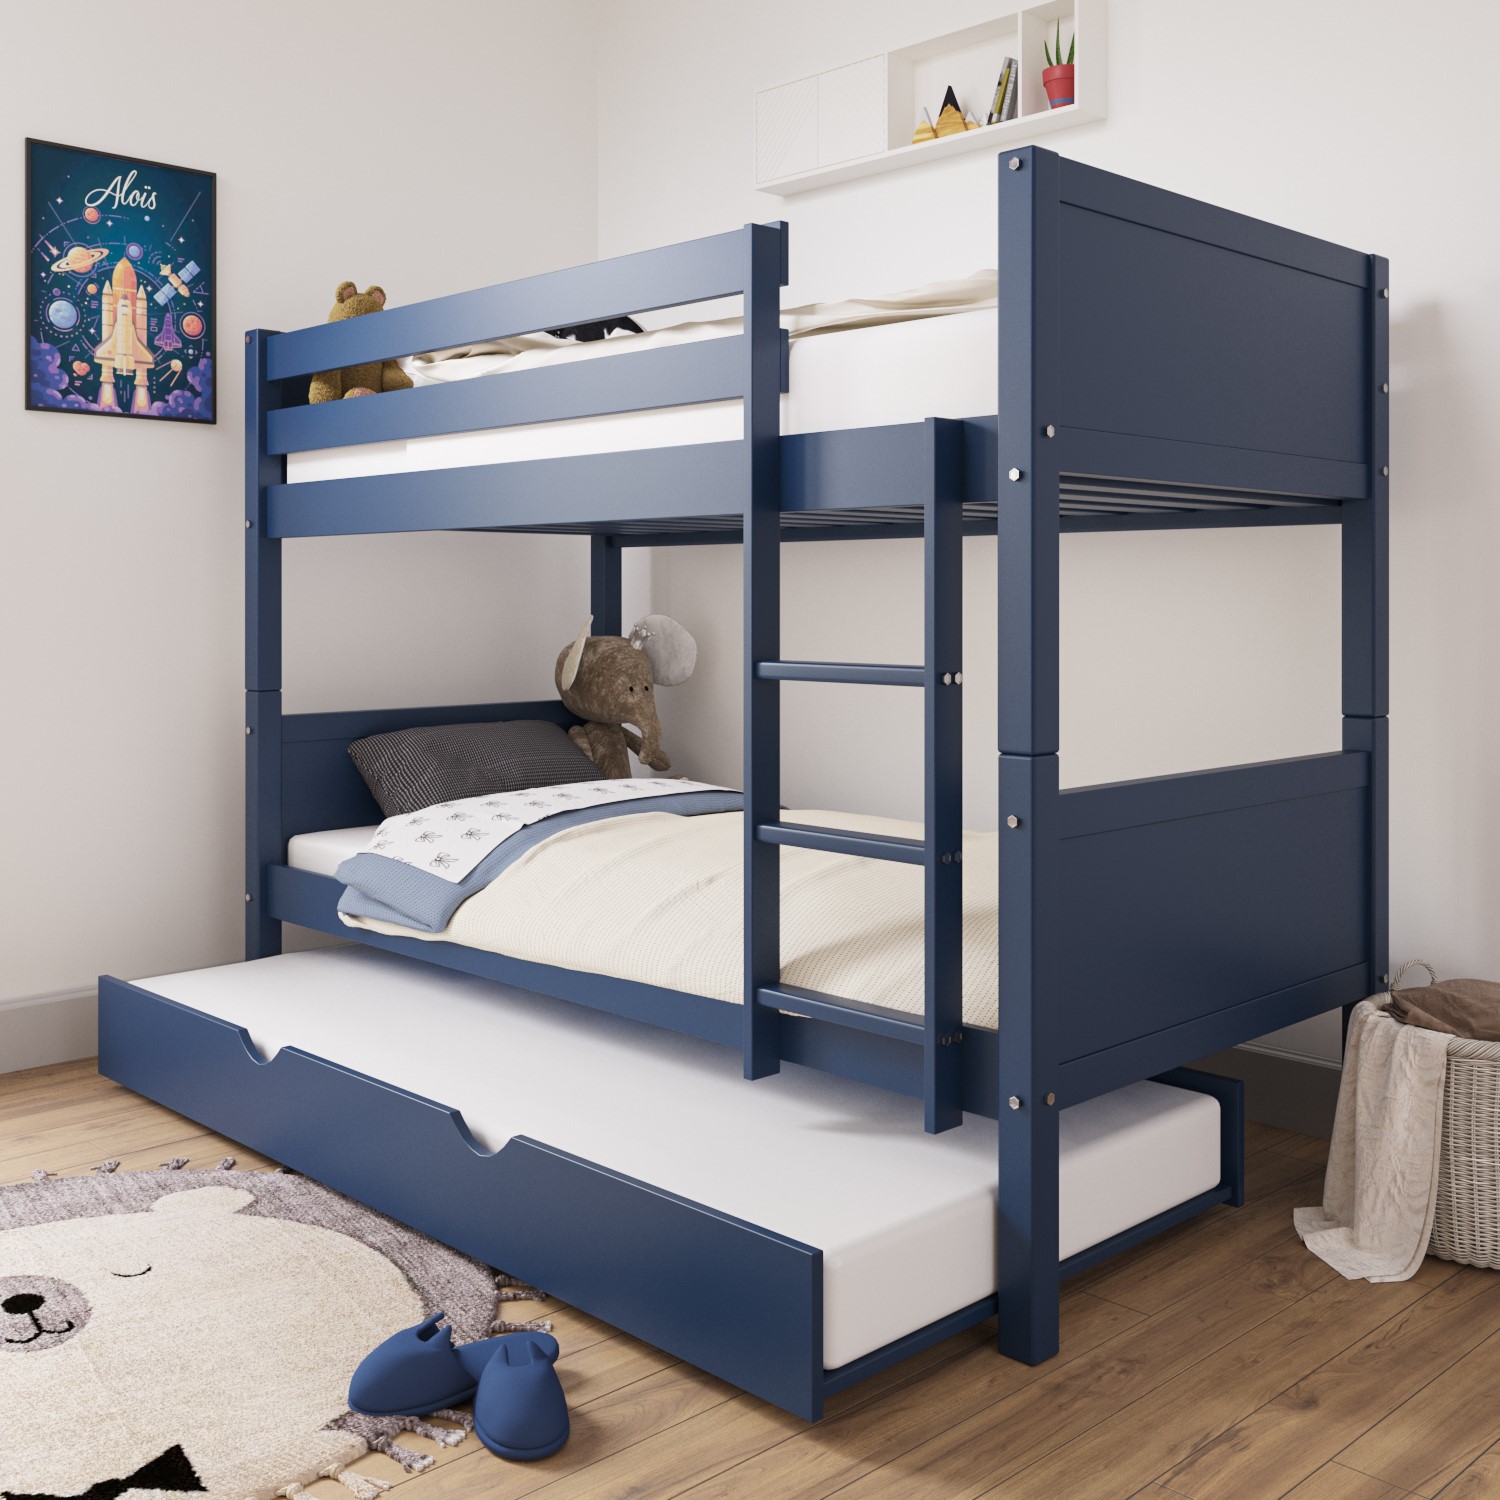 Navy Blue Wooden Bunk Bed With Trundle, Bunk Bed With Pull Out